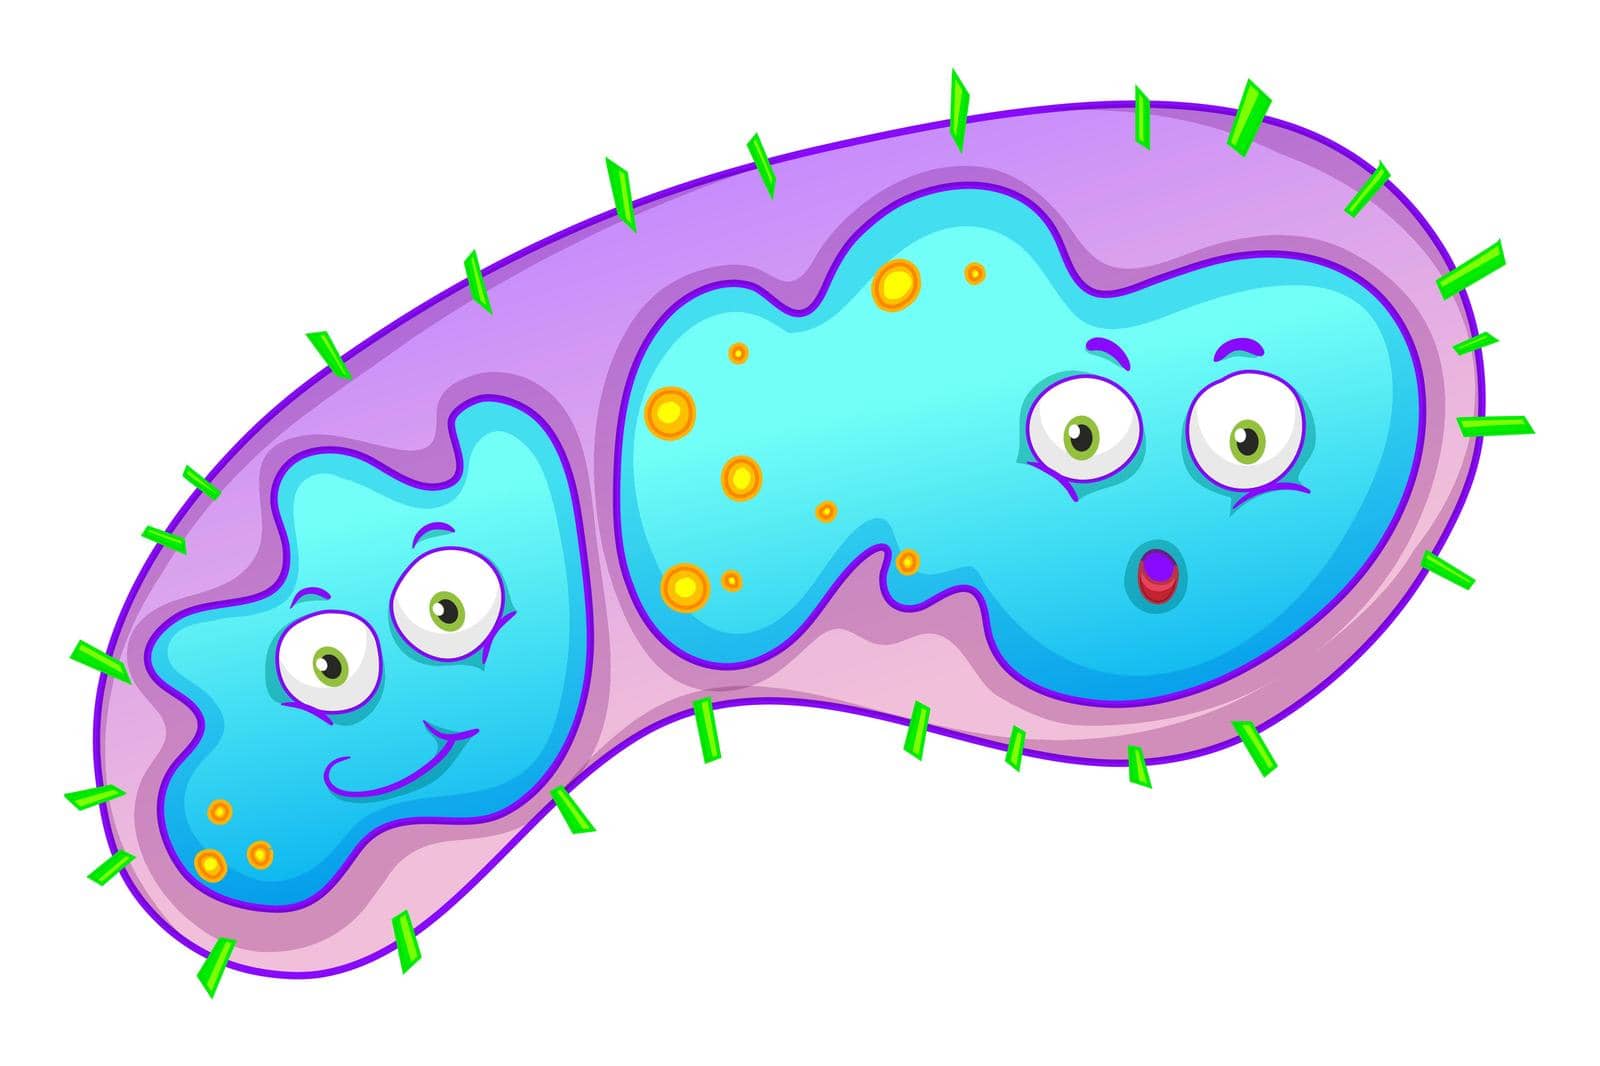 Bacteria with happy face by iimages